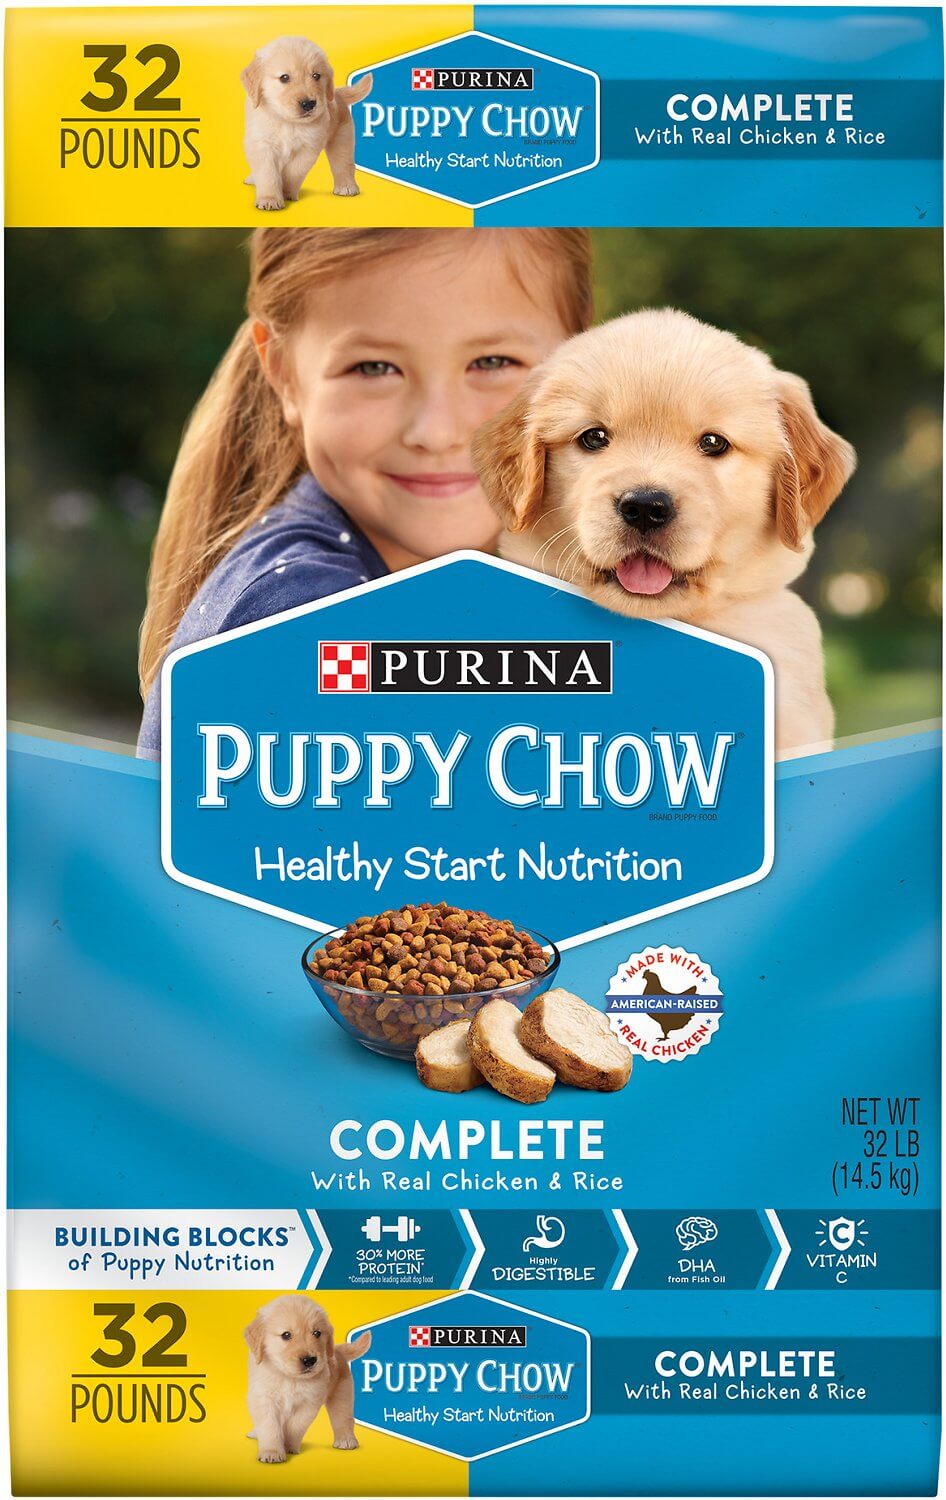 fromm puppy food chewy